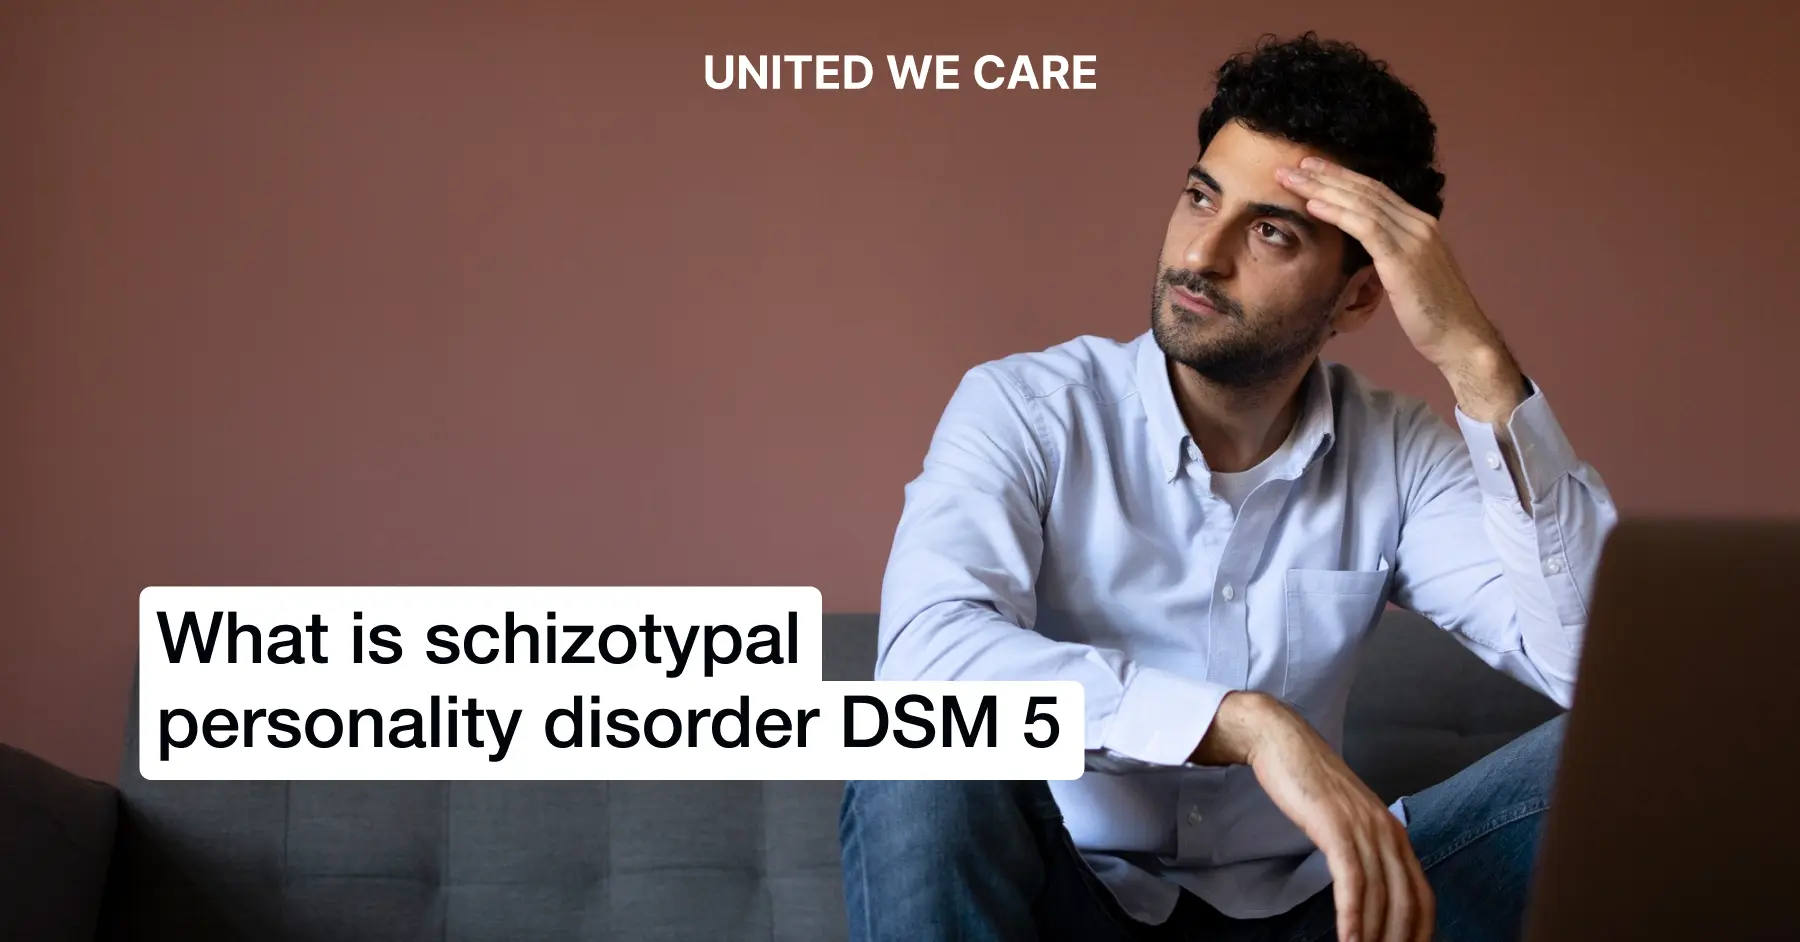 What Is Schizotypal Personality Disorder, DSM-5?